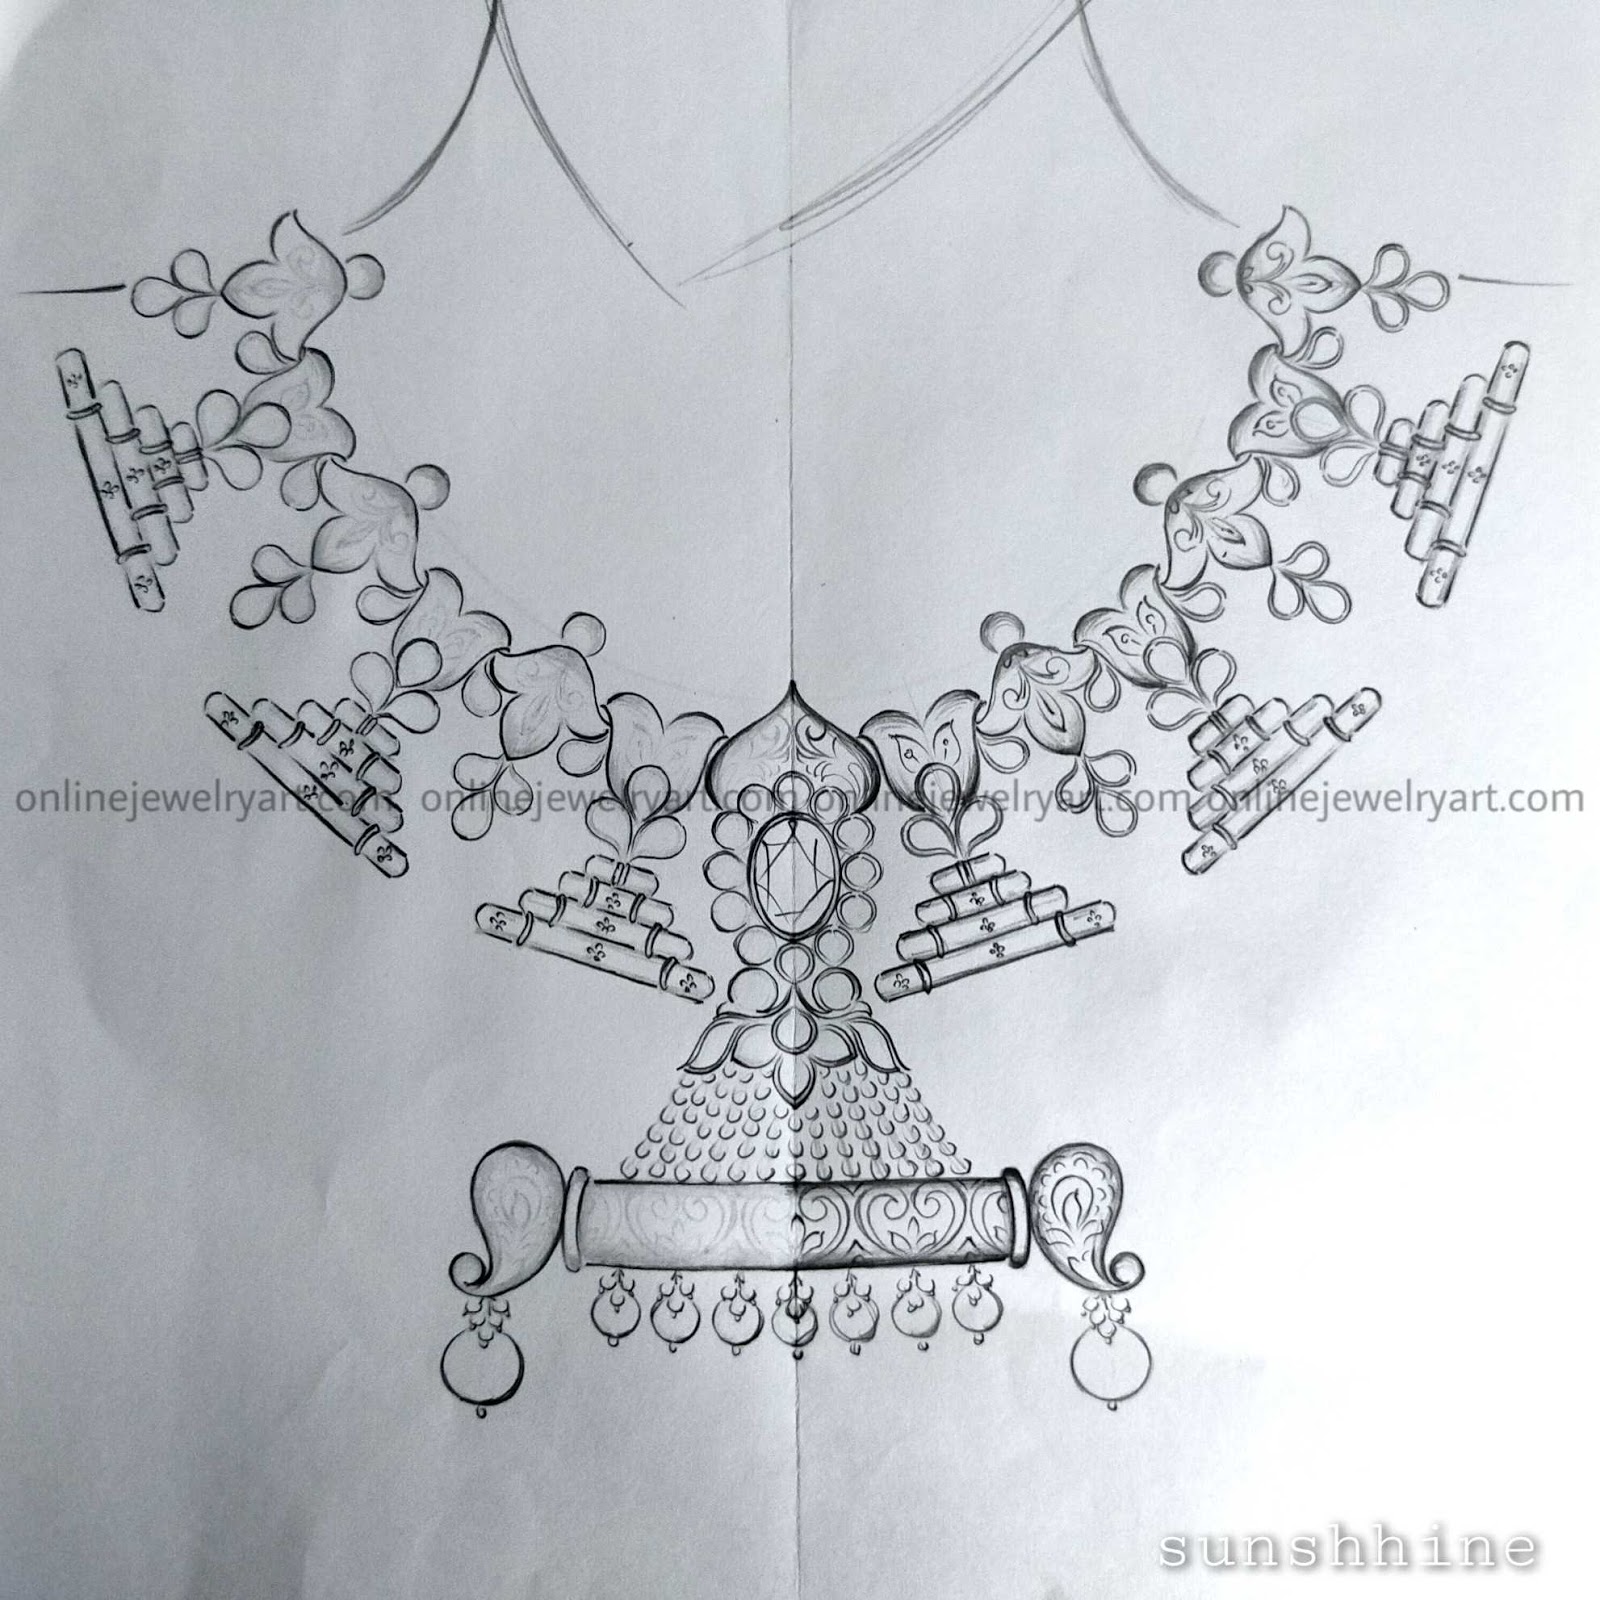 Jewelry Making Sketches Photos and Images